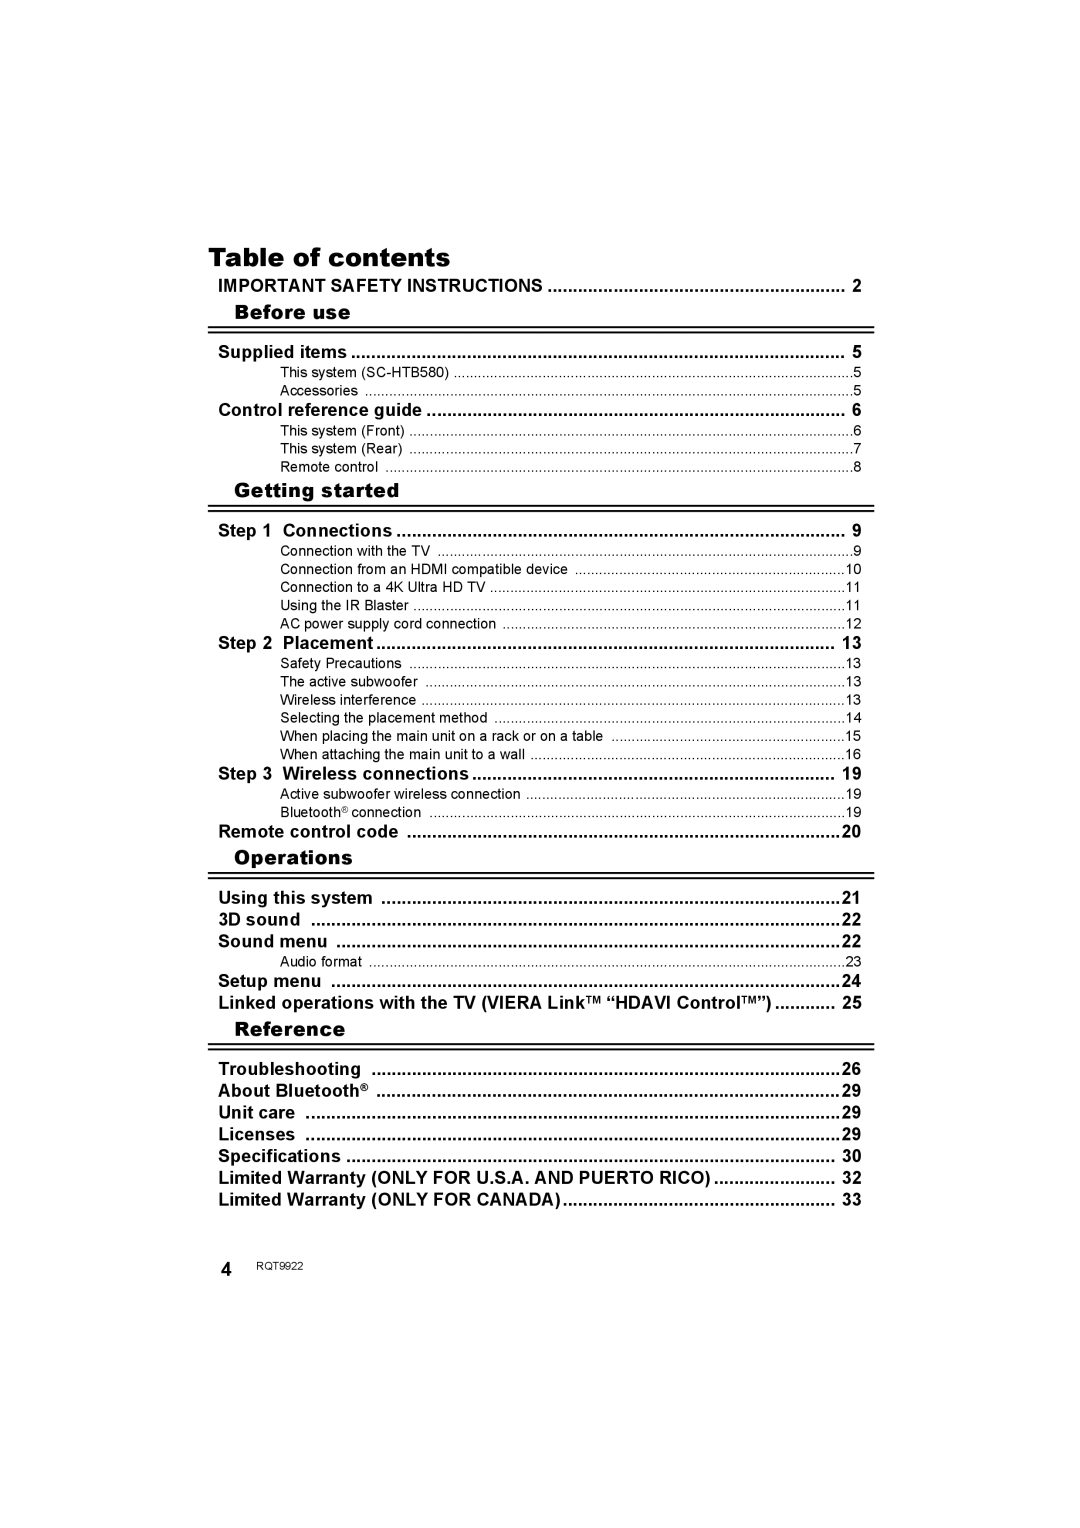 Panasonic SC-HTB580 owner manual Table of contents, Before use, Getting started, Operations, Reference 